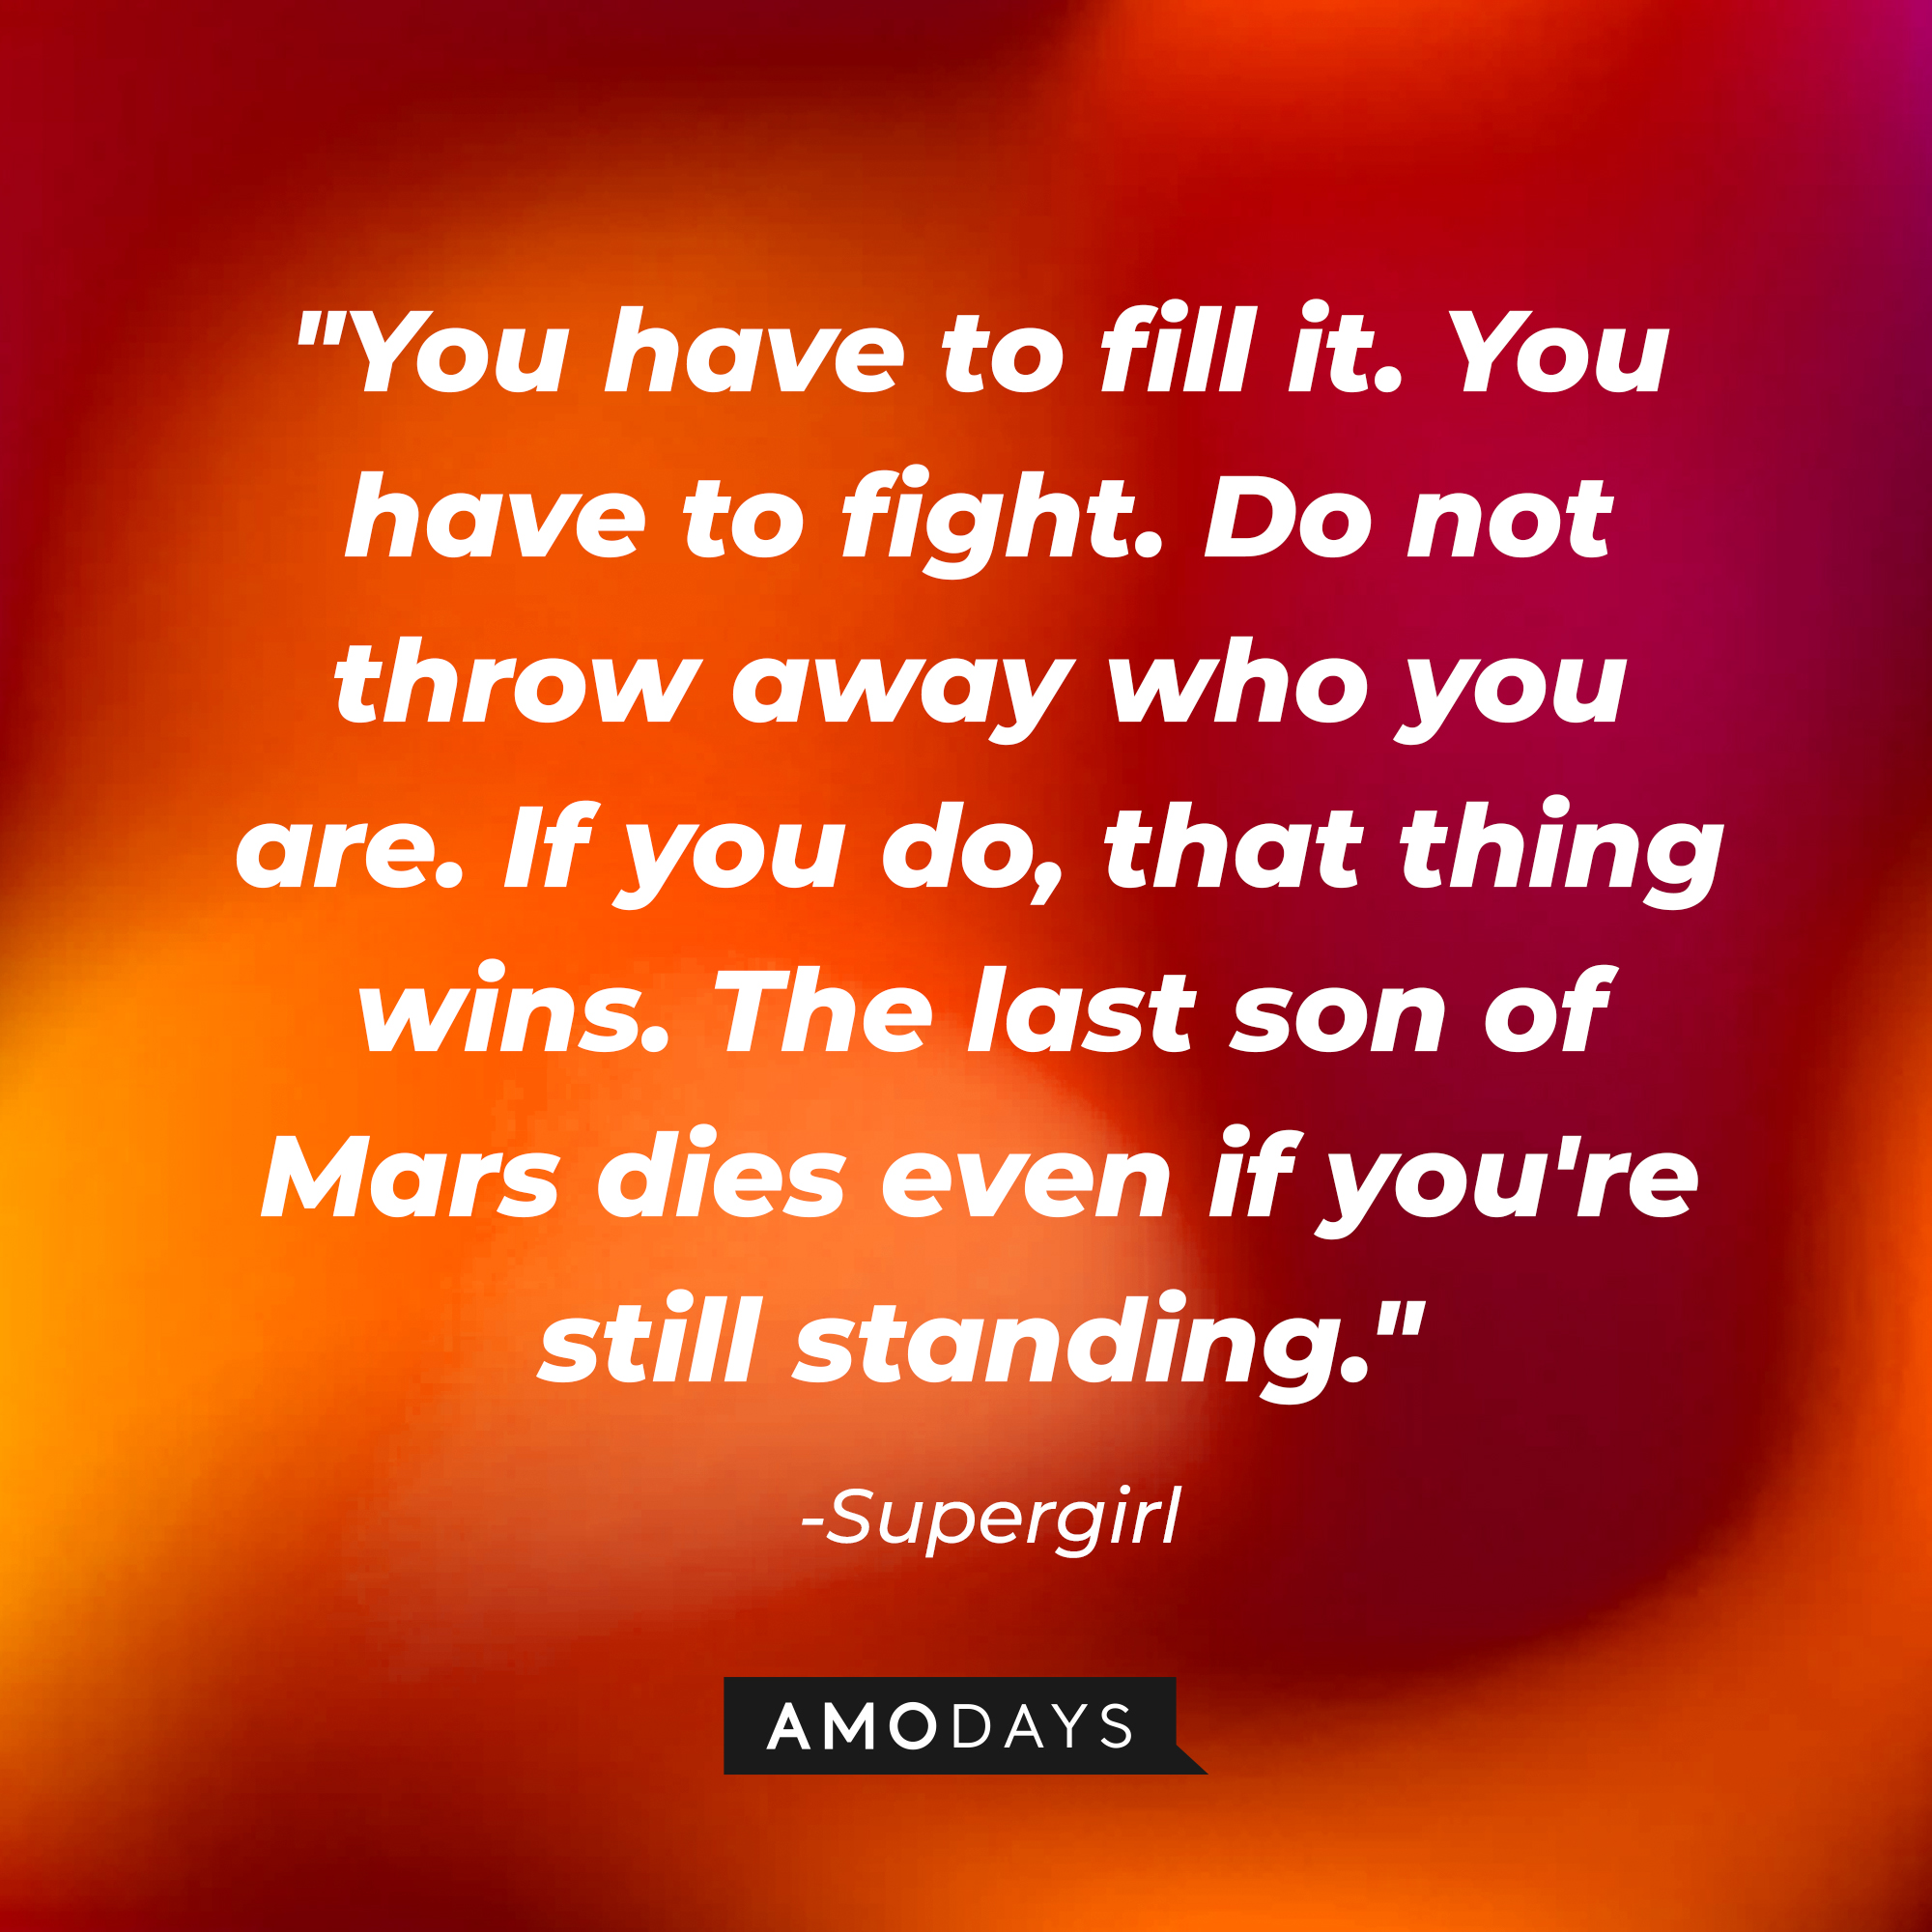 Supergirl's quote: "You have to fill it. You have to fight. Do not throw away who you are. If you do, that thing wins. The last son of Mars dies even if you're still standing." | Source: AmoDays